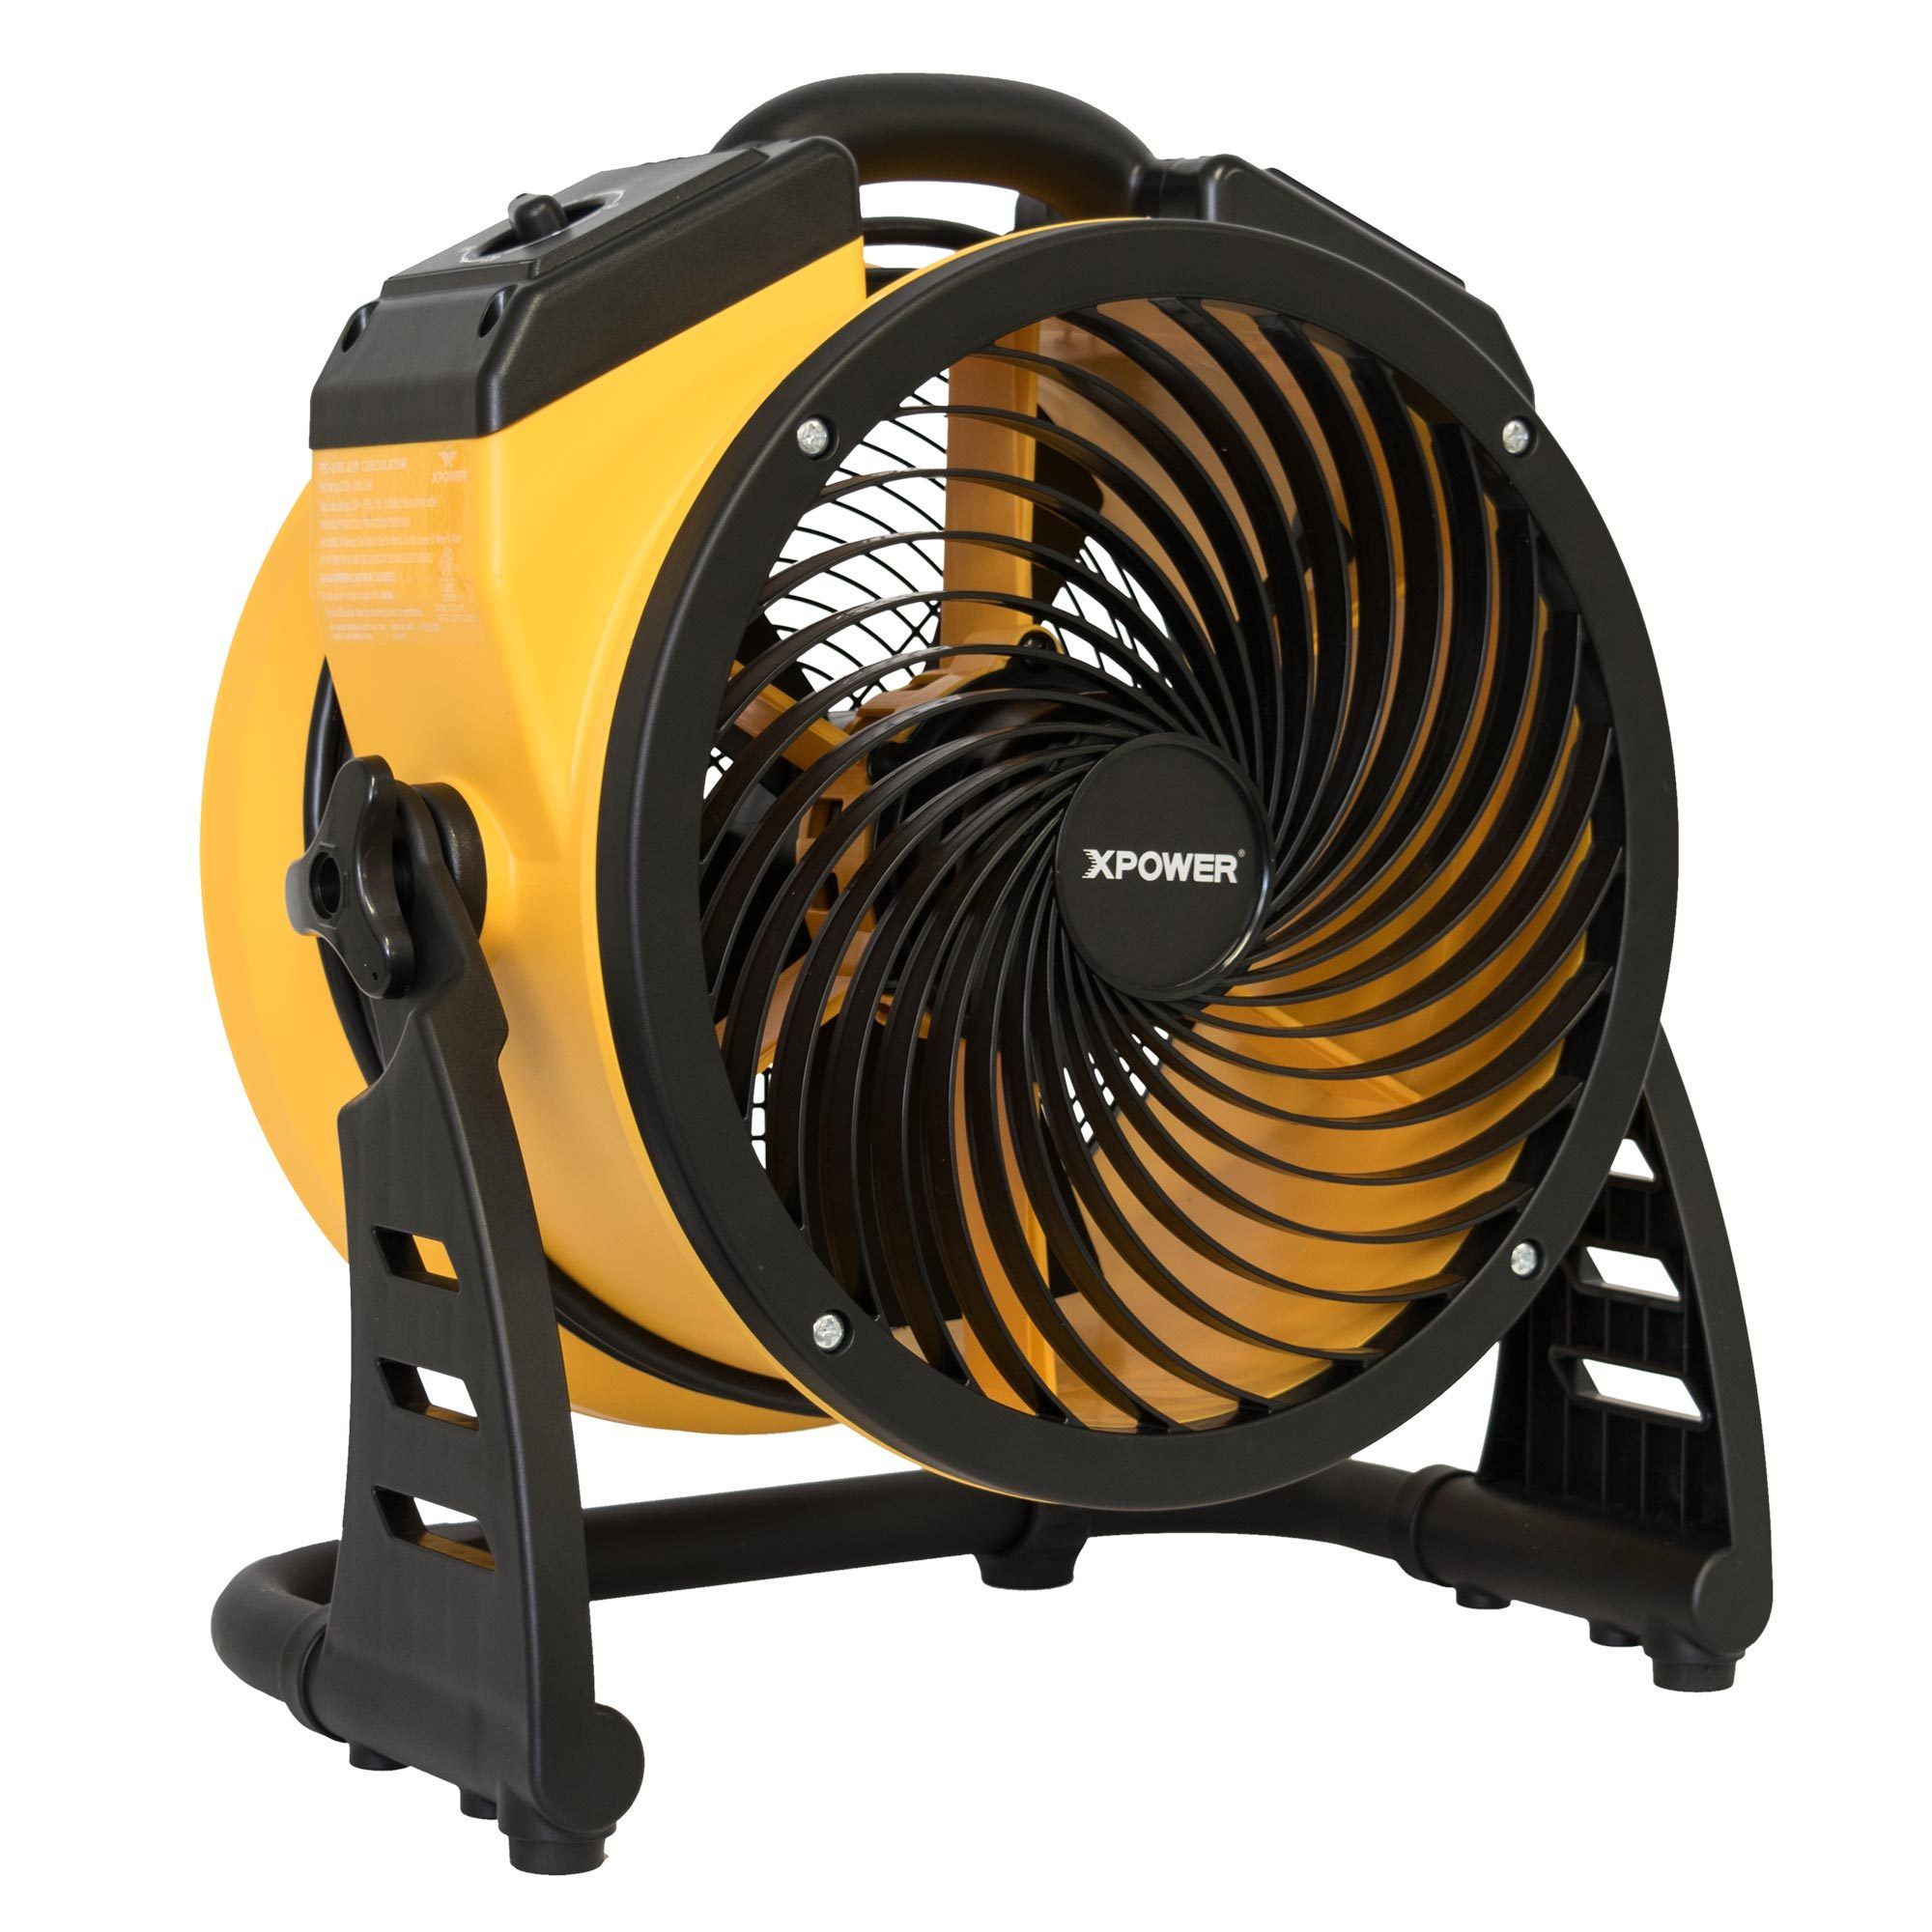 flood-fire-restoration-utility-fans-and-blowers.jpg